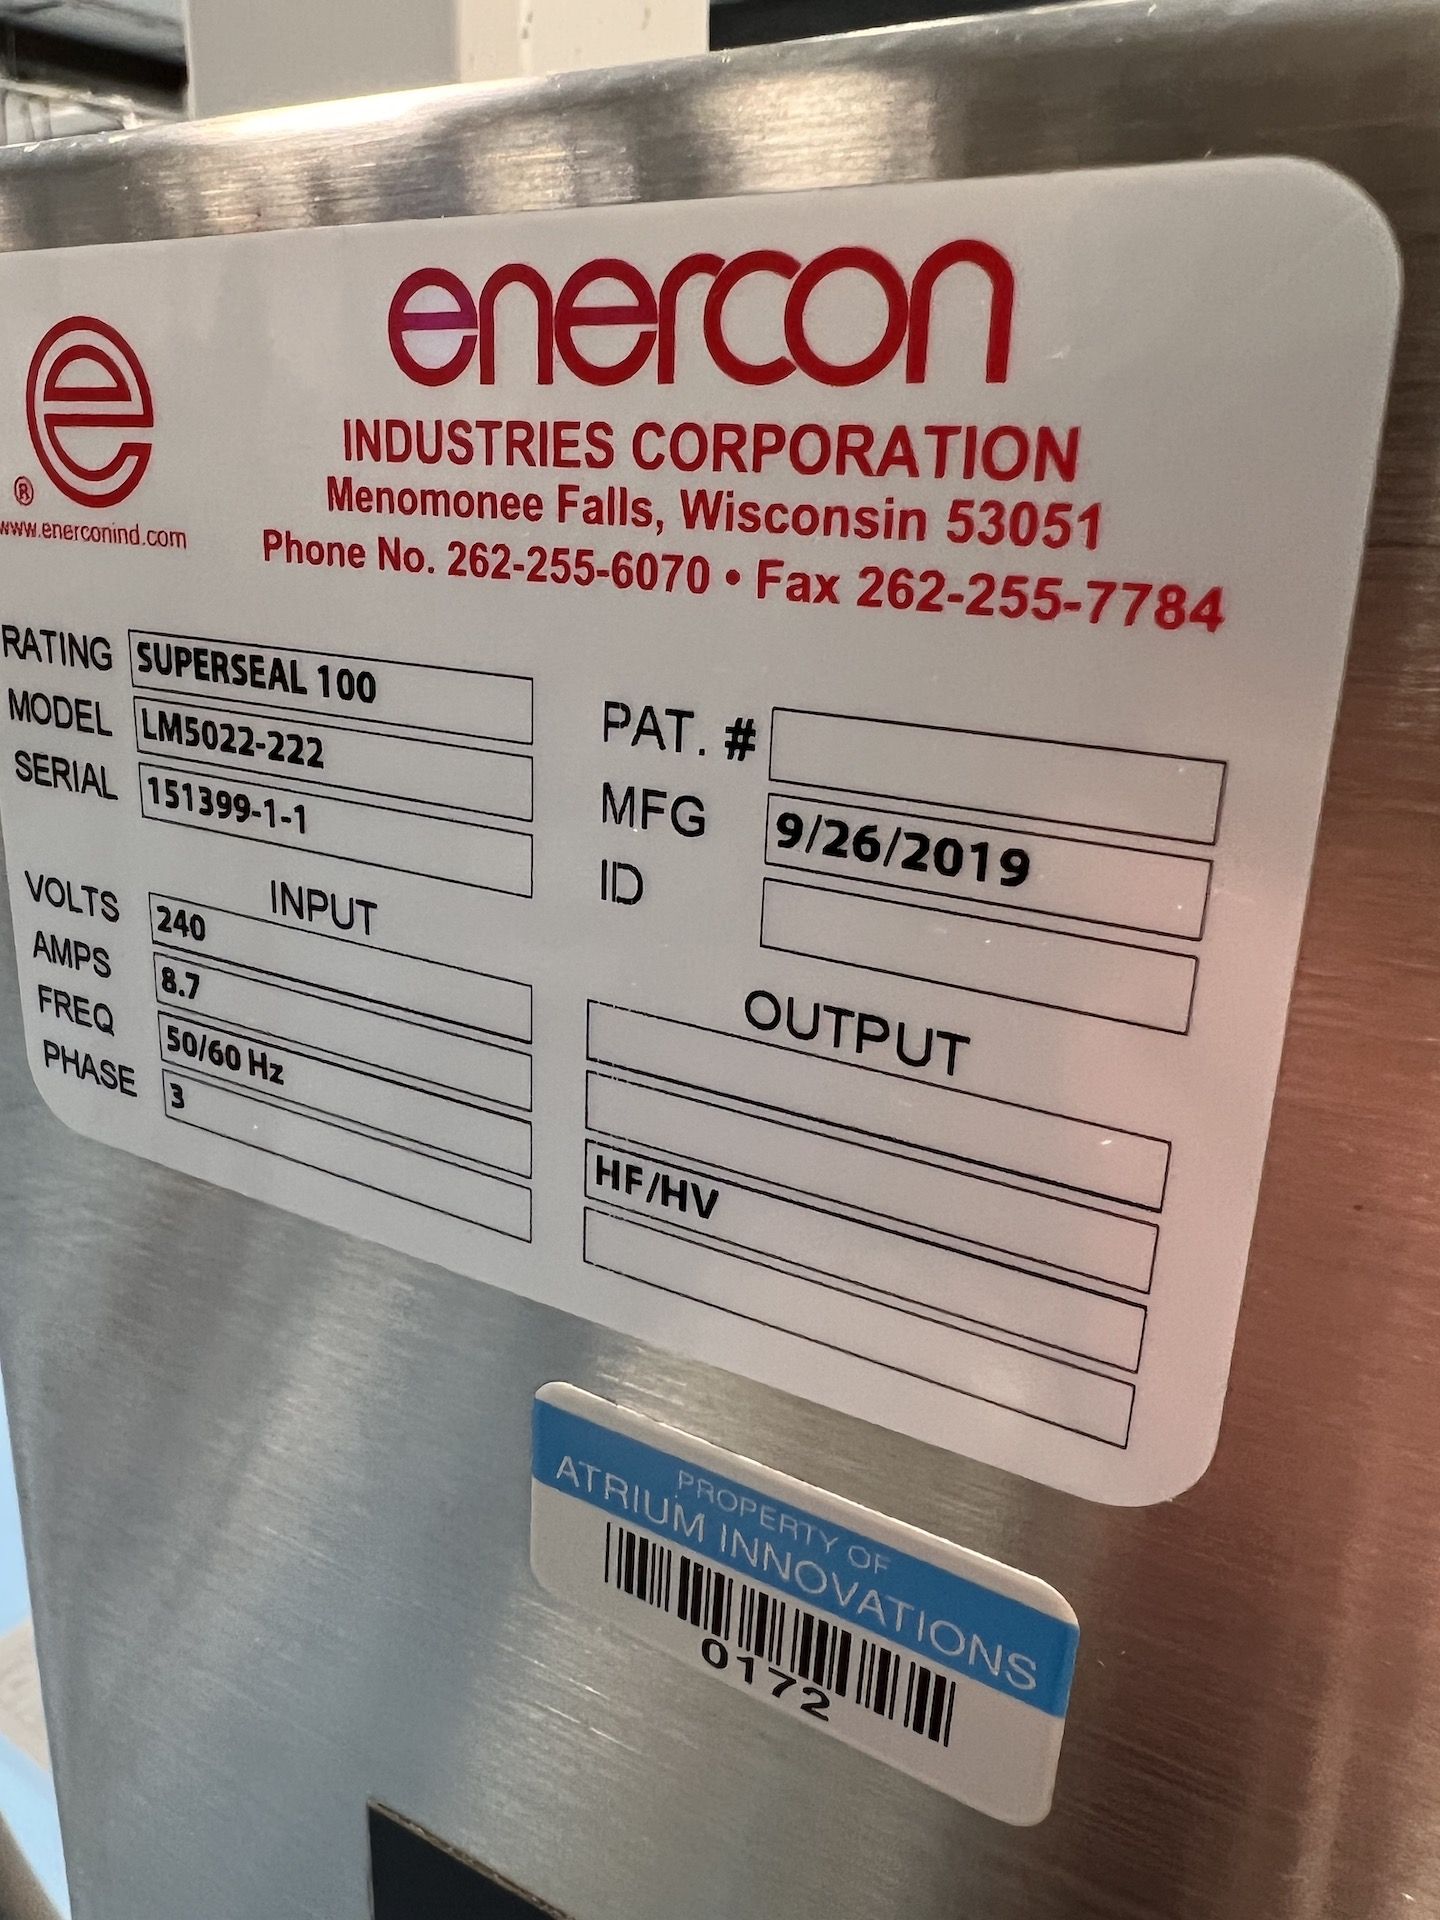 2019 ENERCON SUPERSEAL 100 INDUCTION SEALER, MODEL LM5022-222, S/N 151399-1-1, 240/3/50/60 - Image 3 of 7